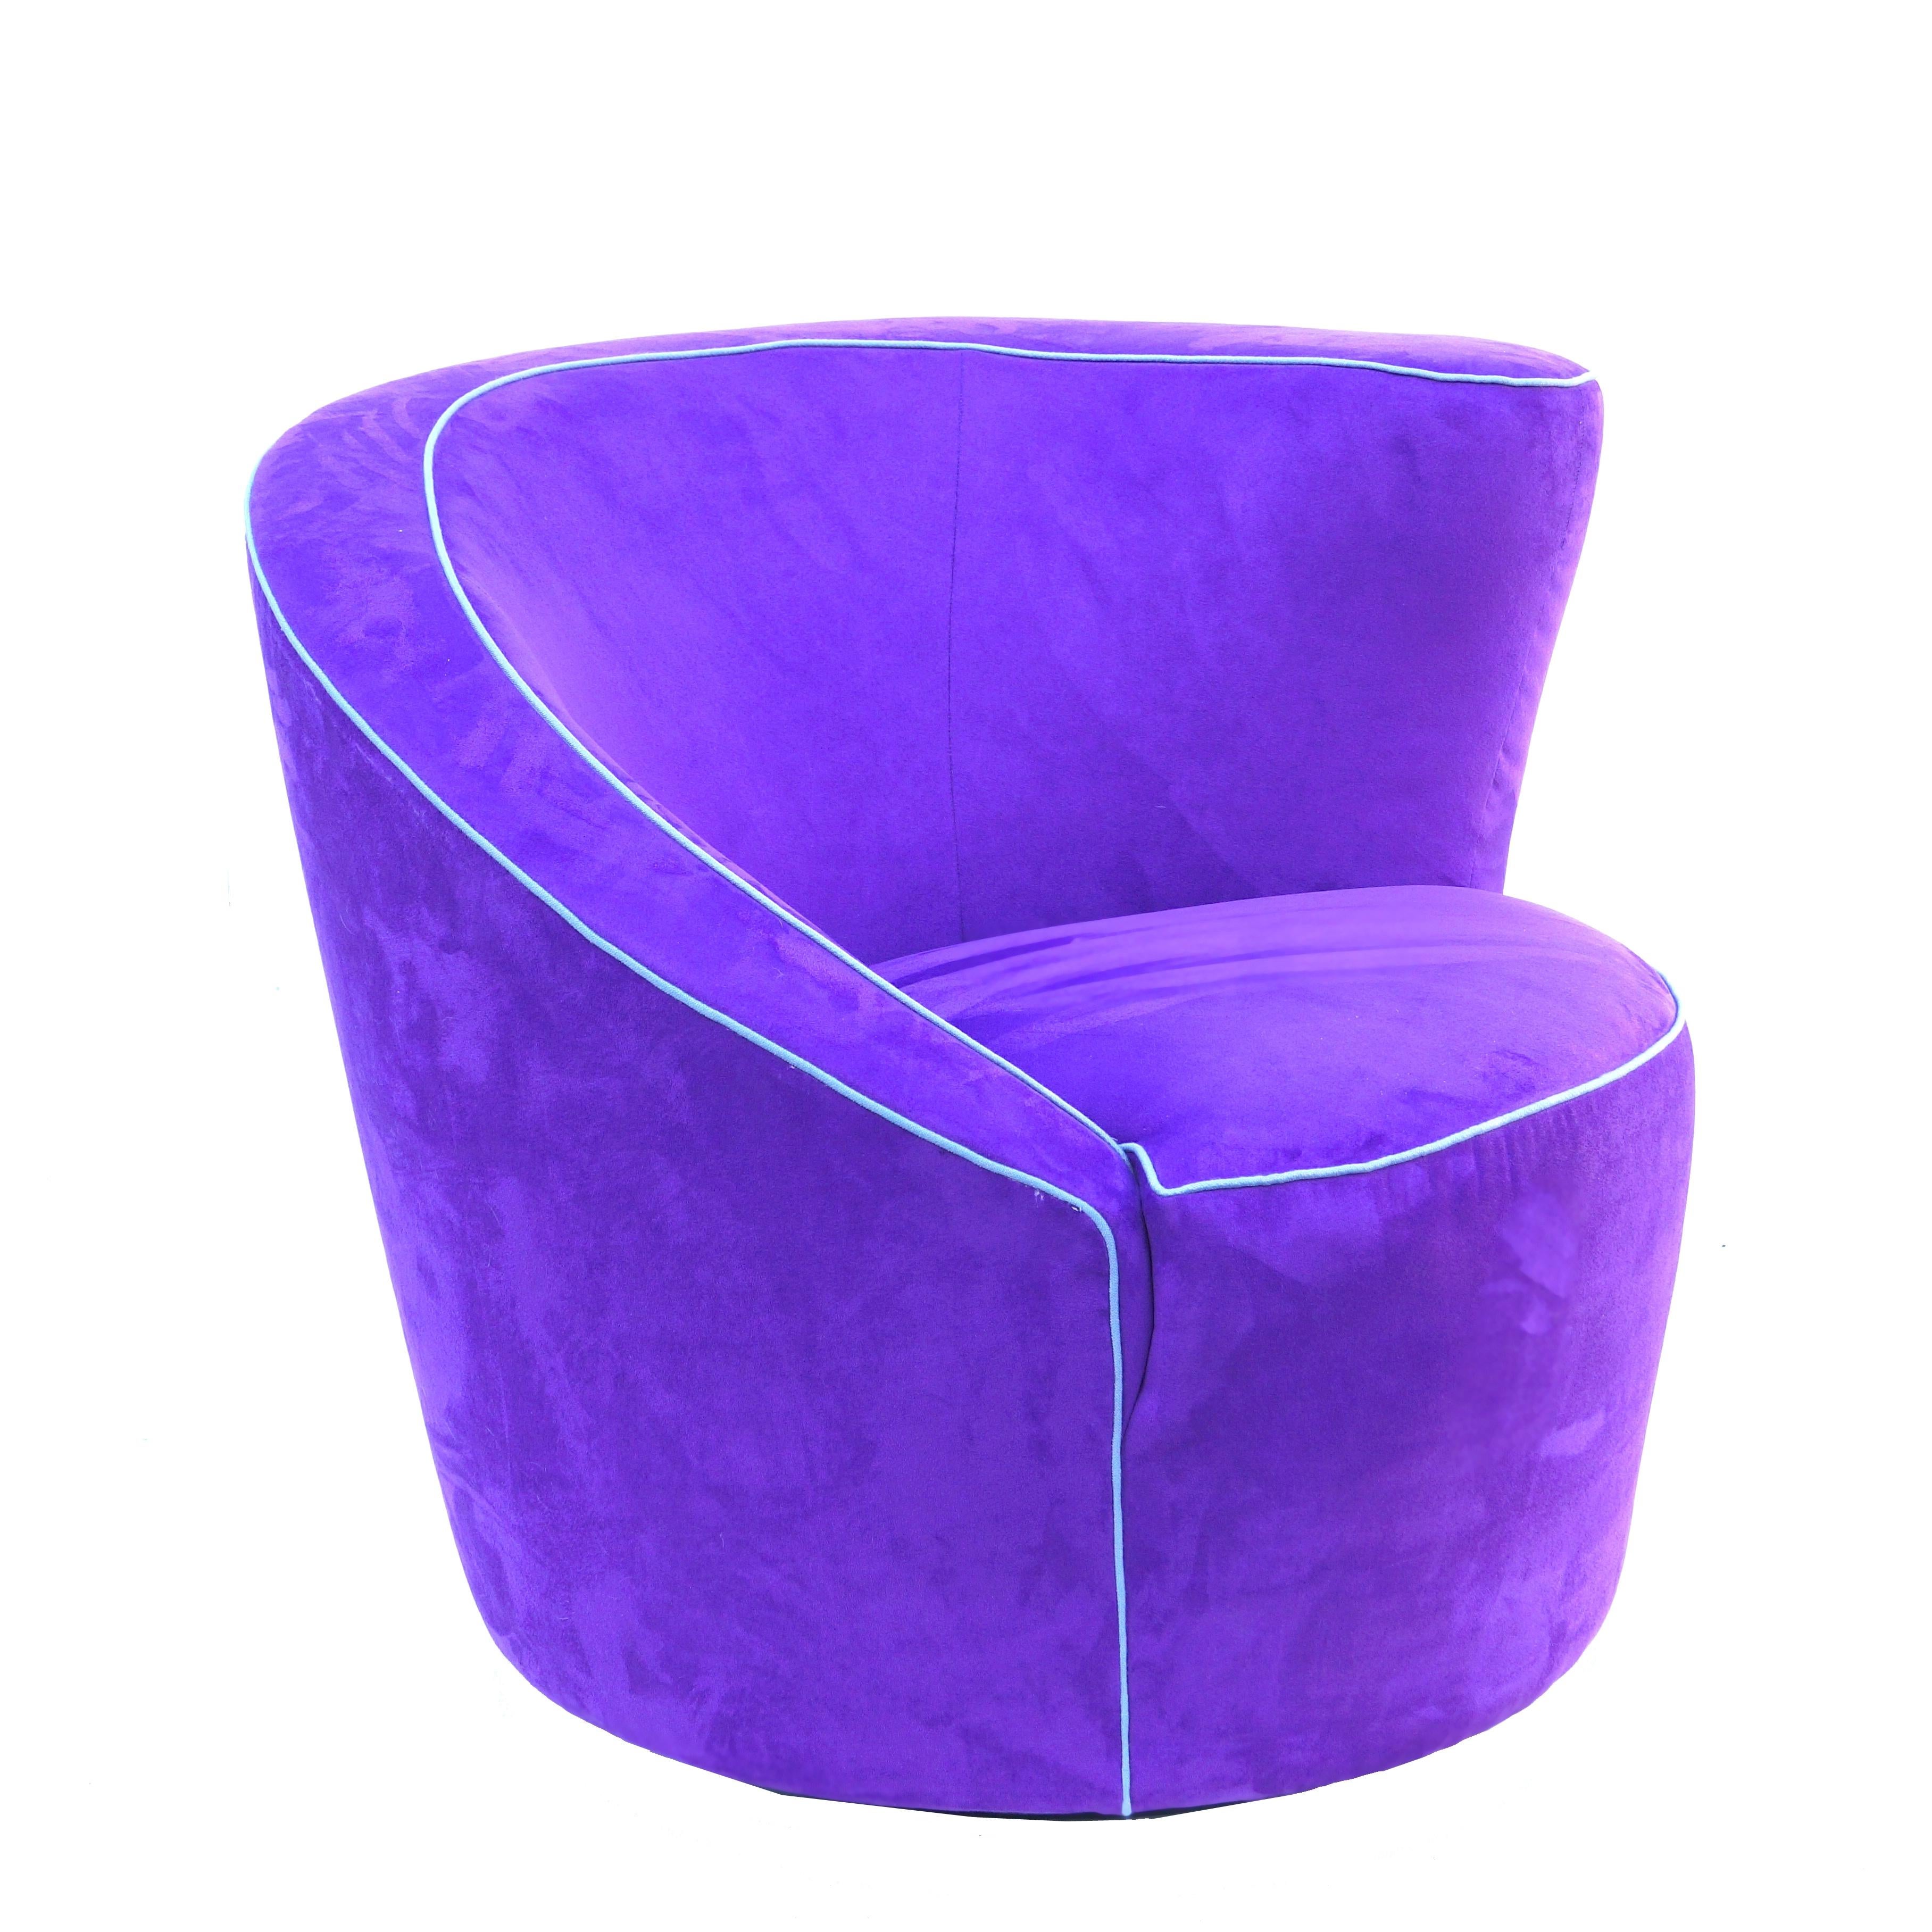 Late 20th Century Corkscrew Purple Modern Contemporary Swivel Lounge Chair Armchair For Sale